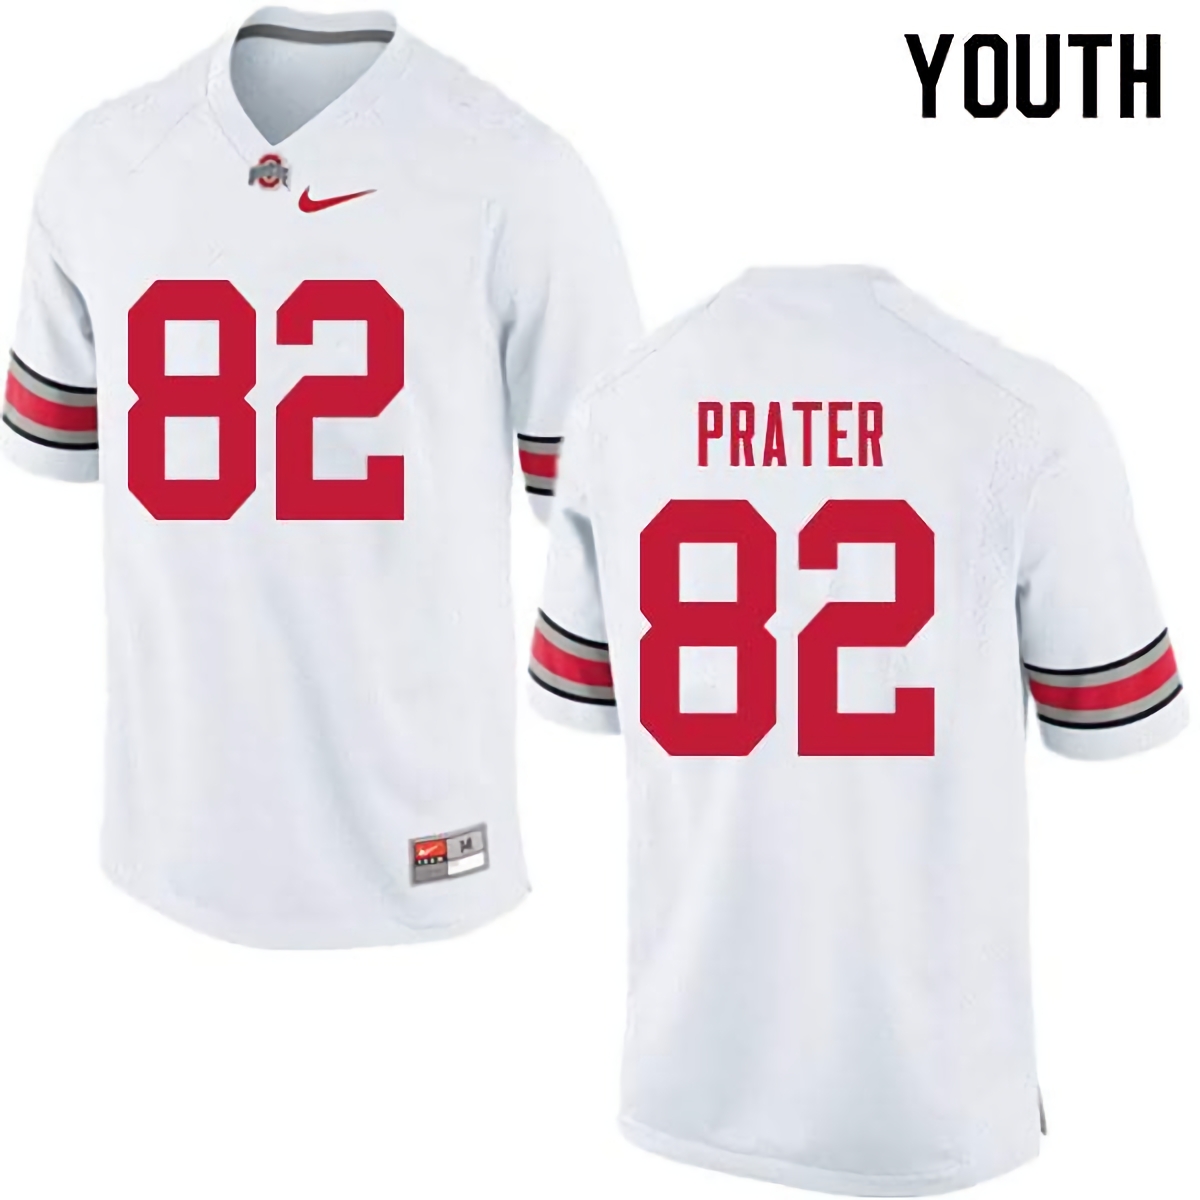 Garyn Prater Ohio State Buckeyes Youth NCAA #82 Nike White College Stitched Football Jersey BUF4056WI